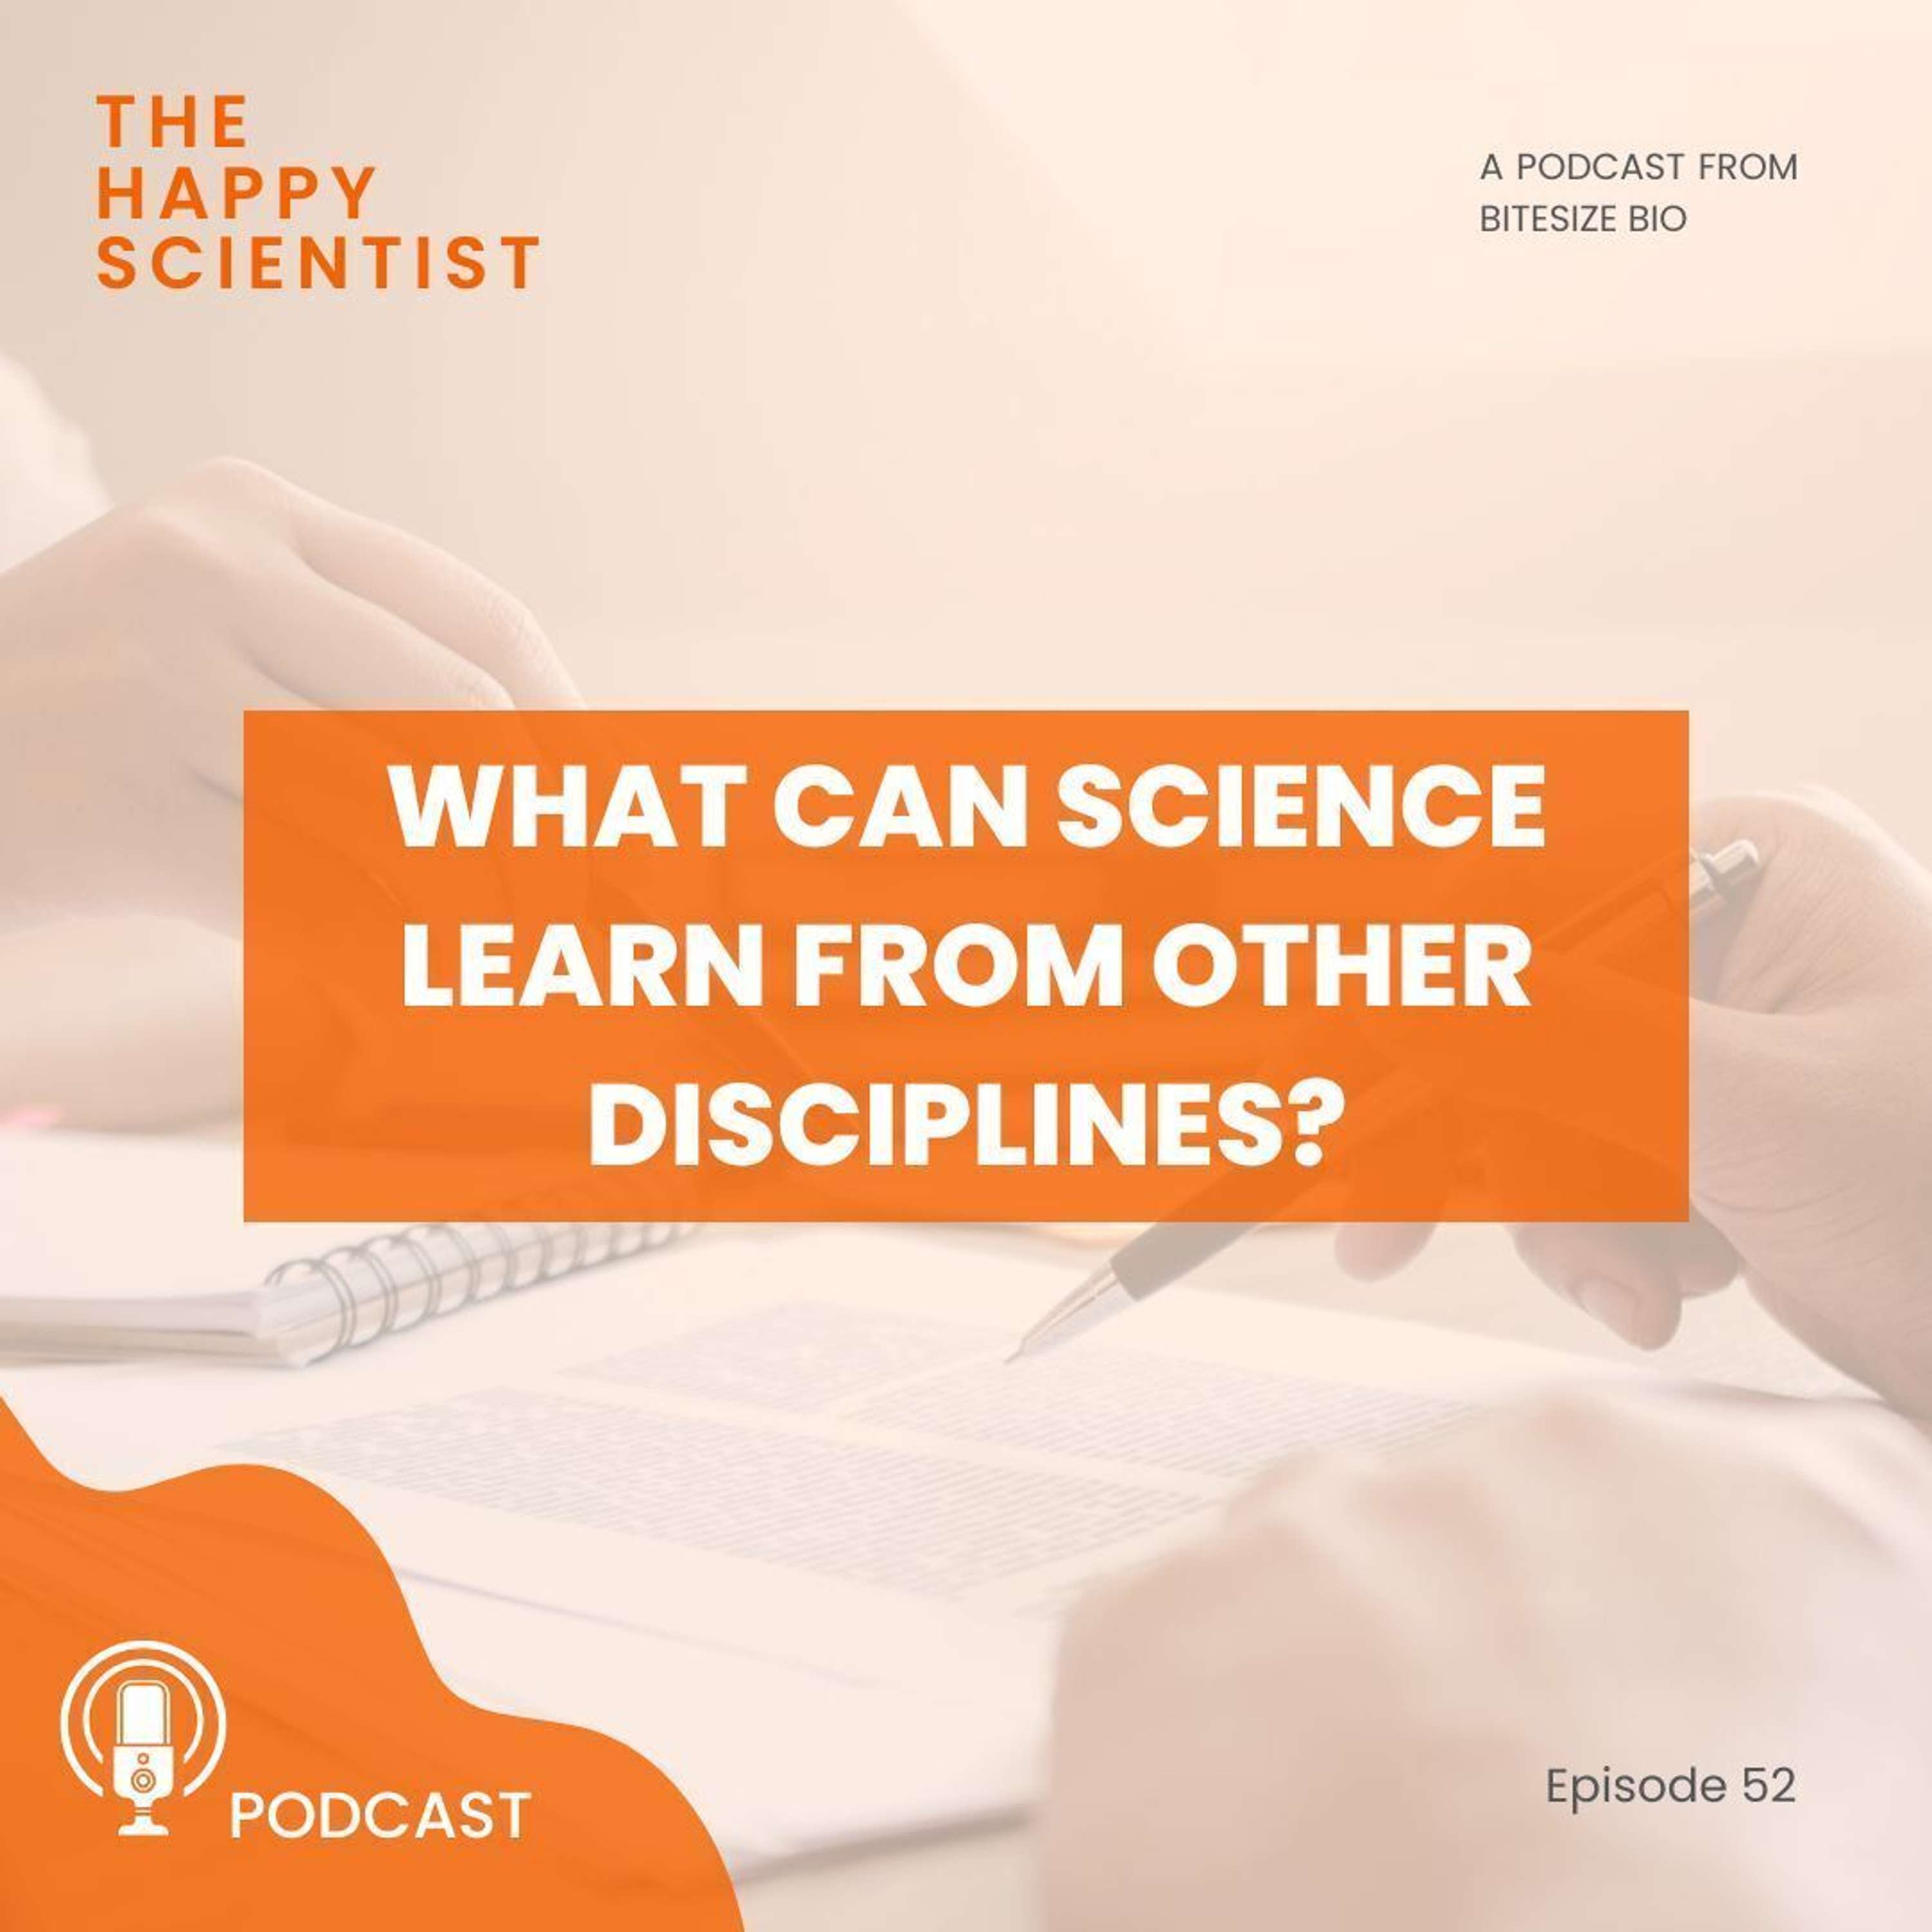 What Can Science Learn from Other Disciplines?